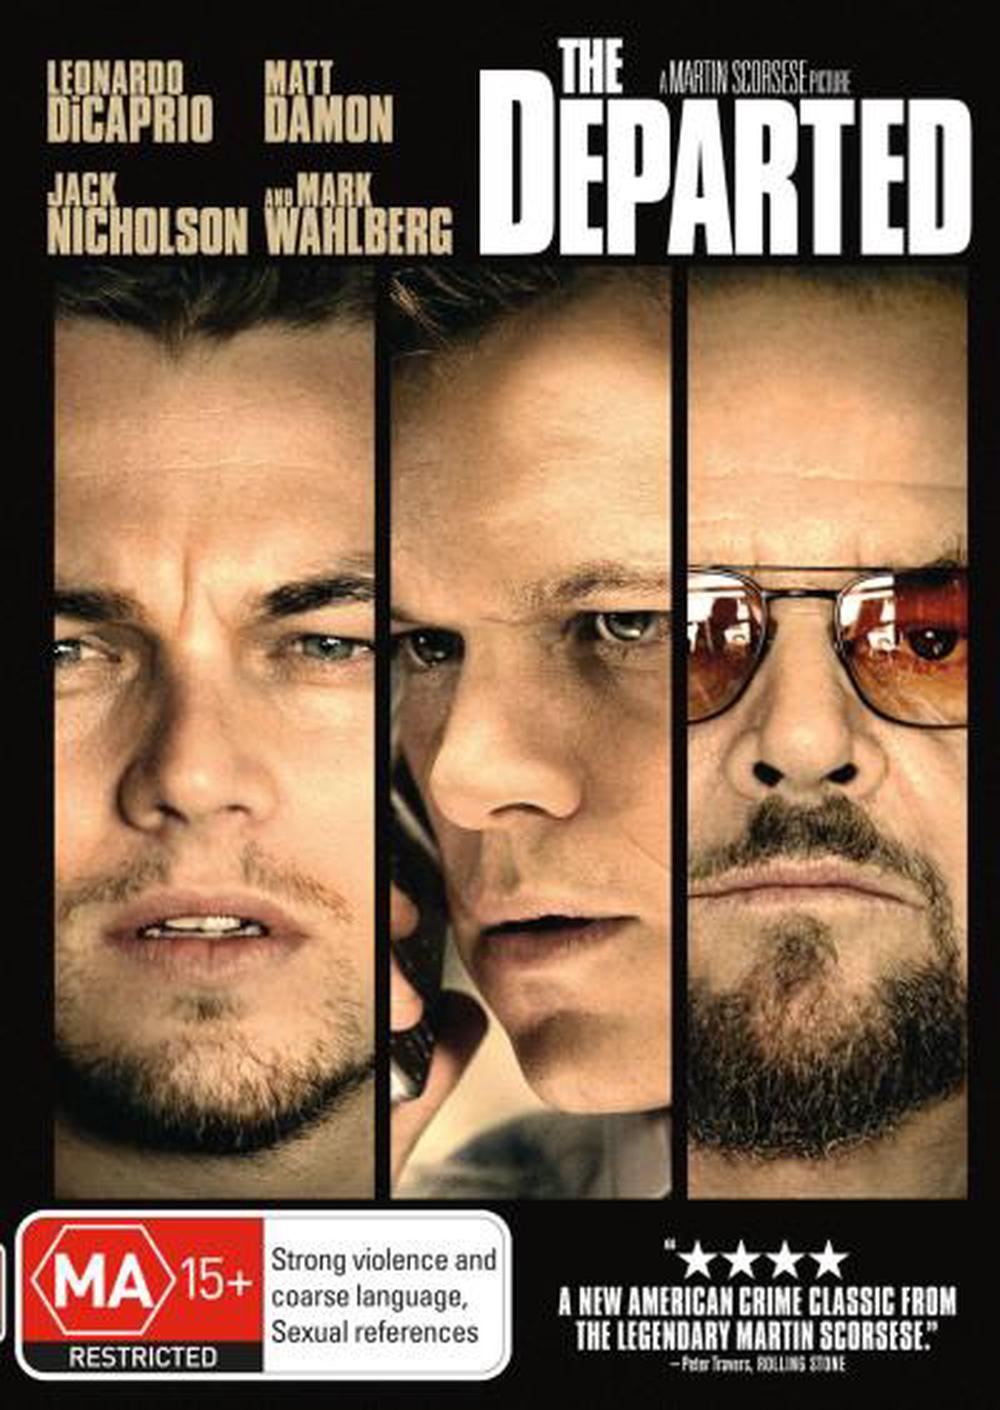 The Departed - DVD Region 4 Free Shipping! 9325336105078 | eBay